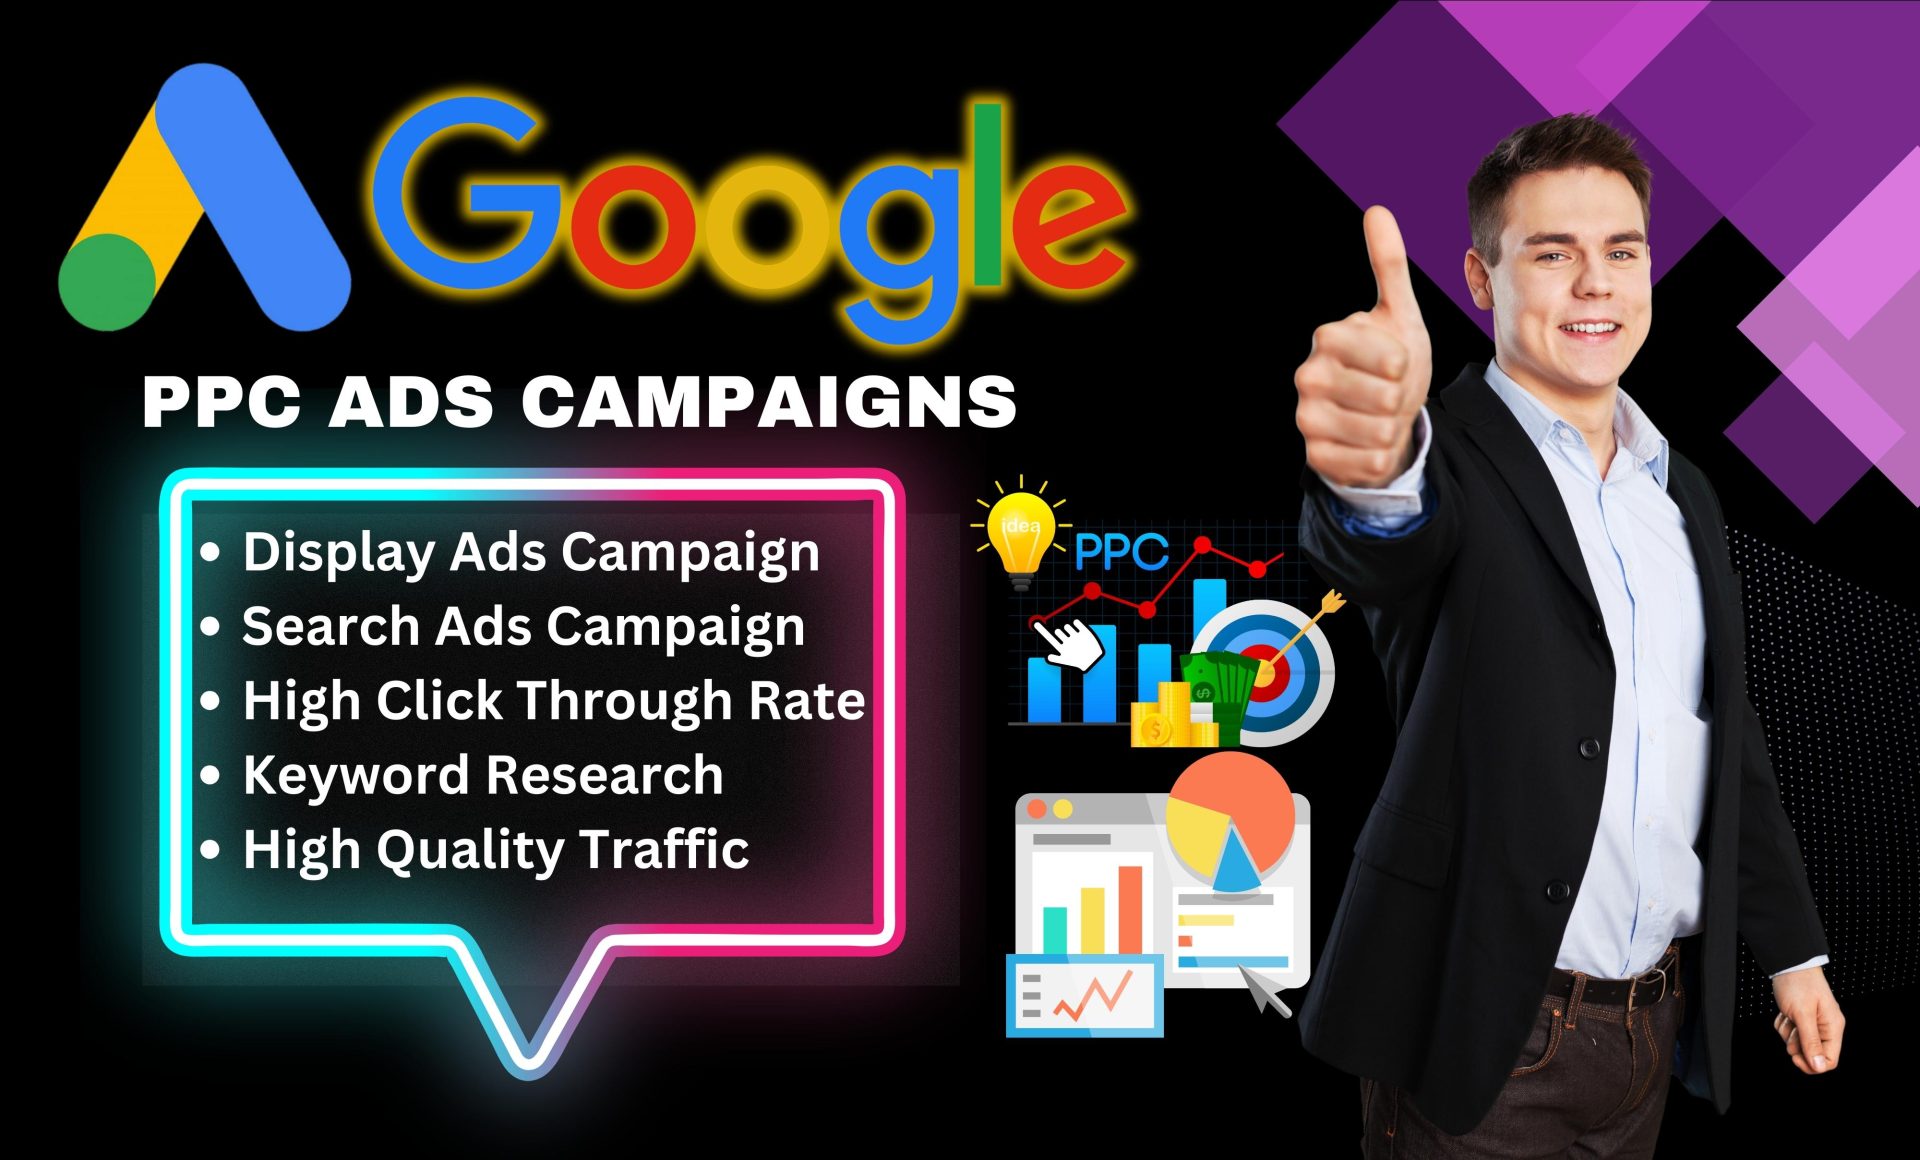 32350I will design Google banner ads and display ads